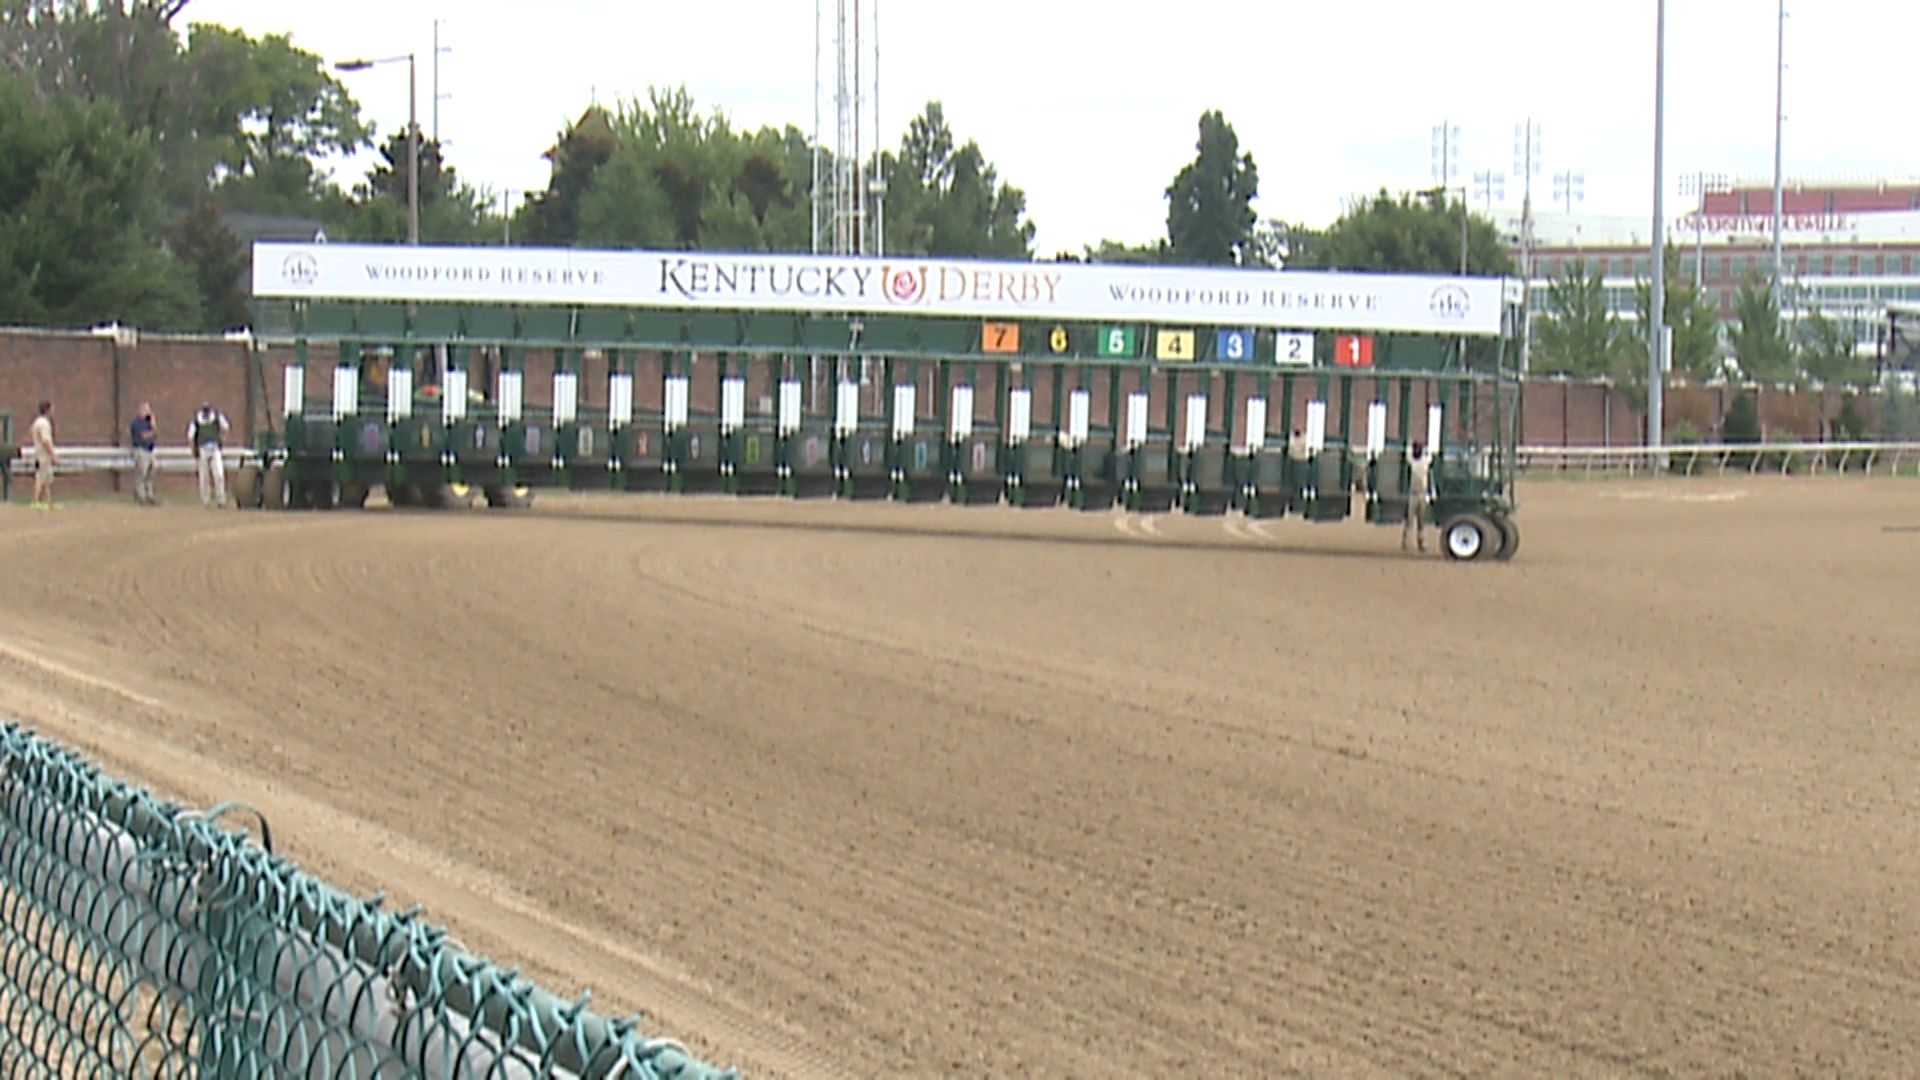 New starting gate for this year's Kentucky Derby